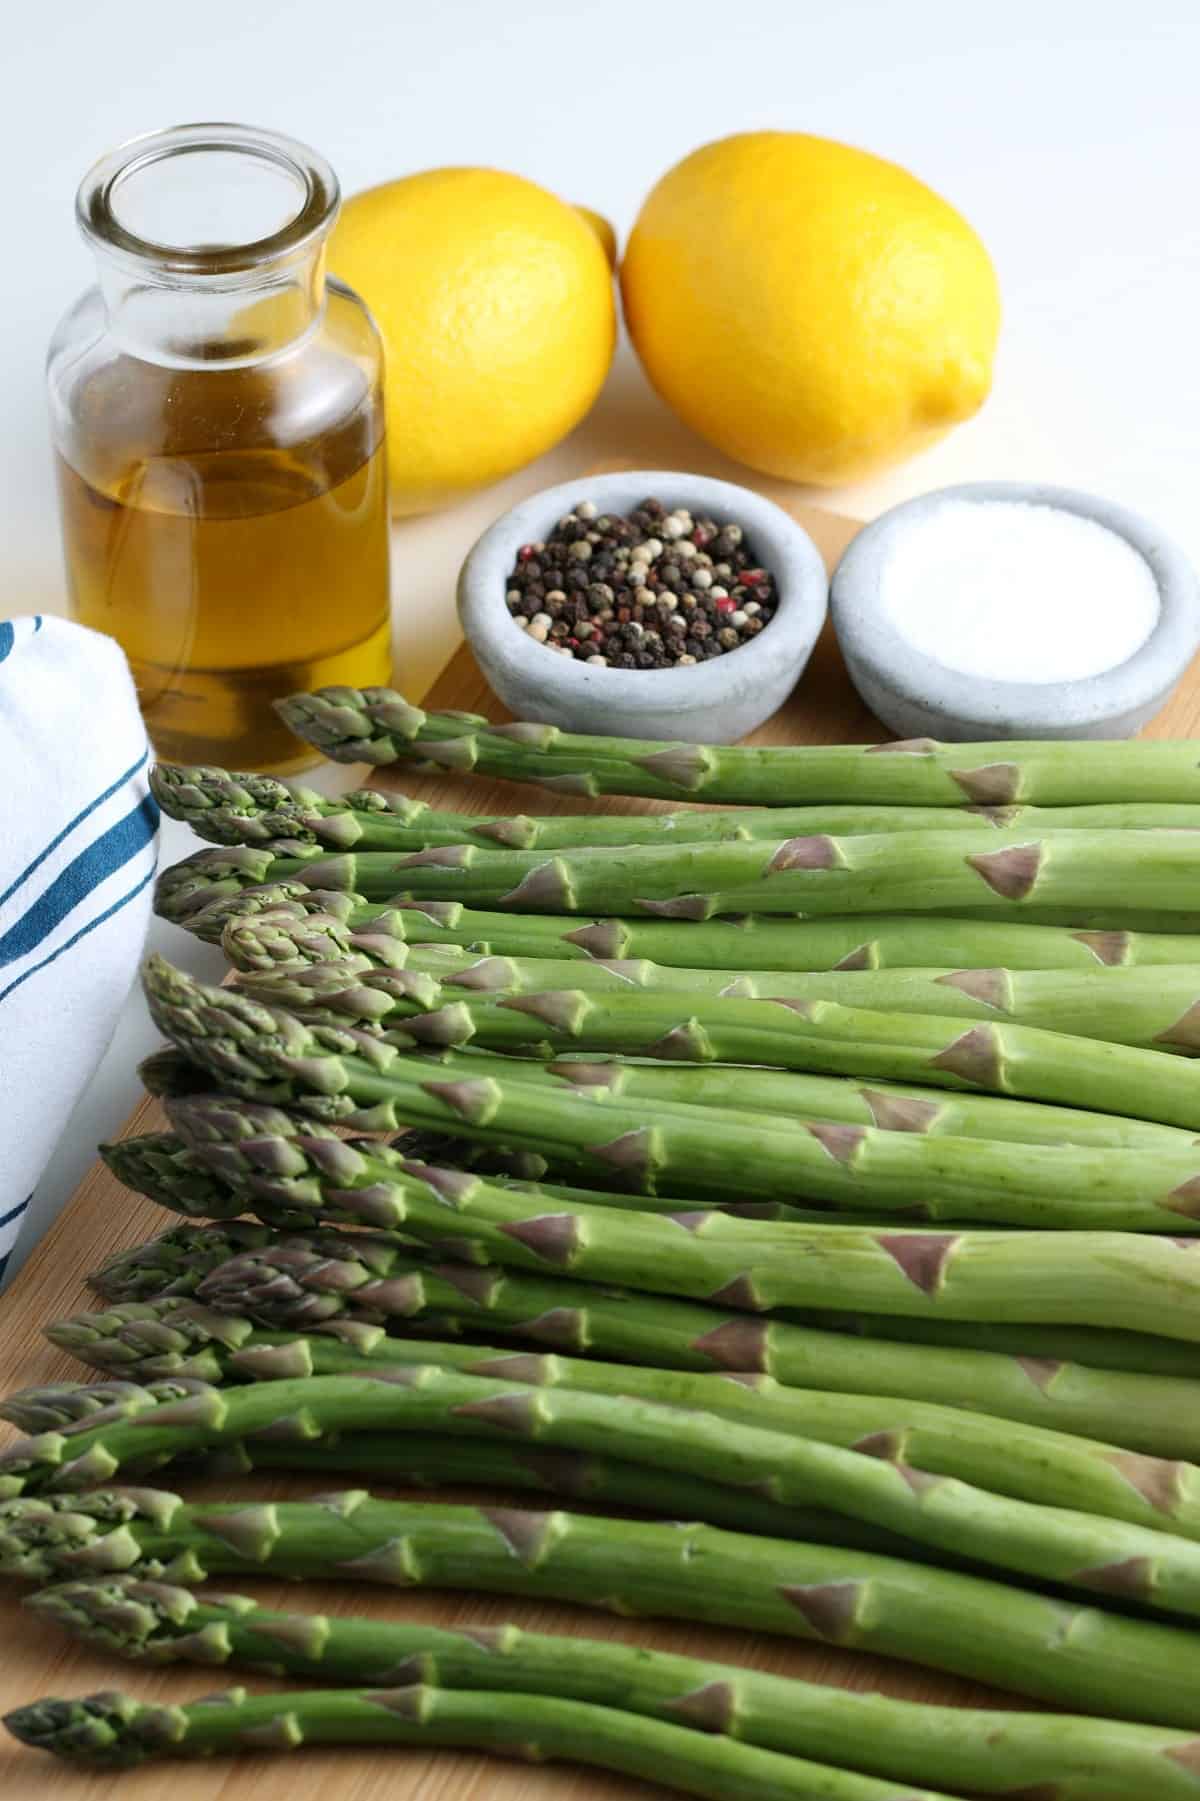 Fresh asparagus is laying side by side on a cutting board along with ingredients necessary for grilling.